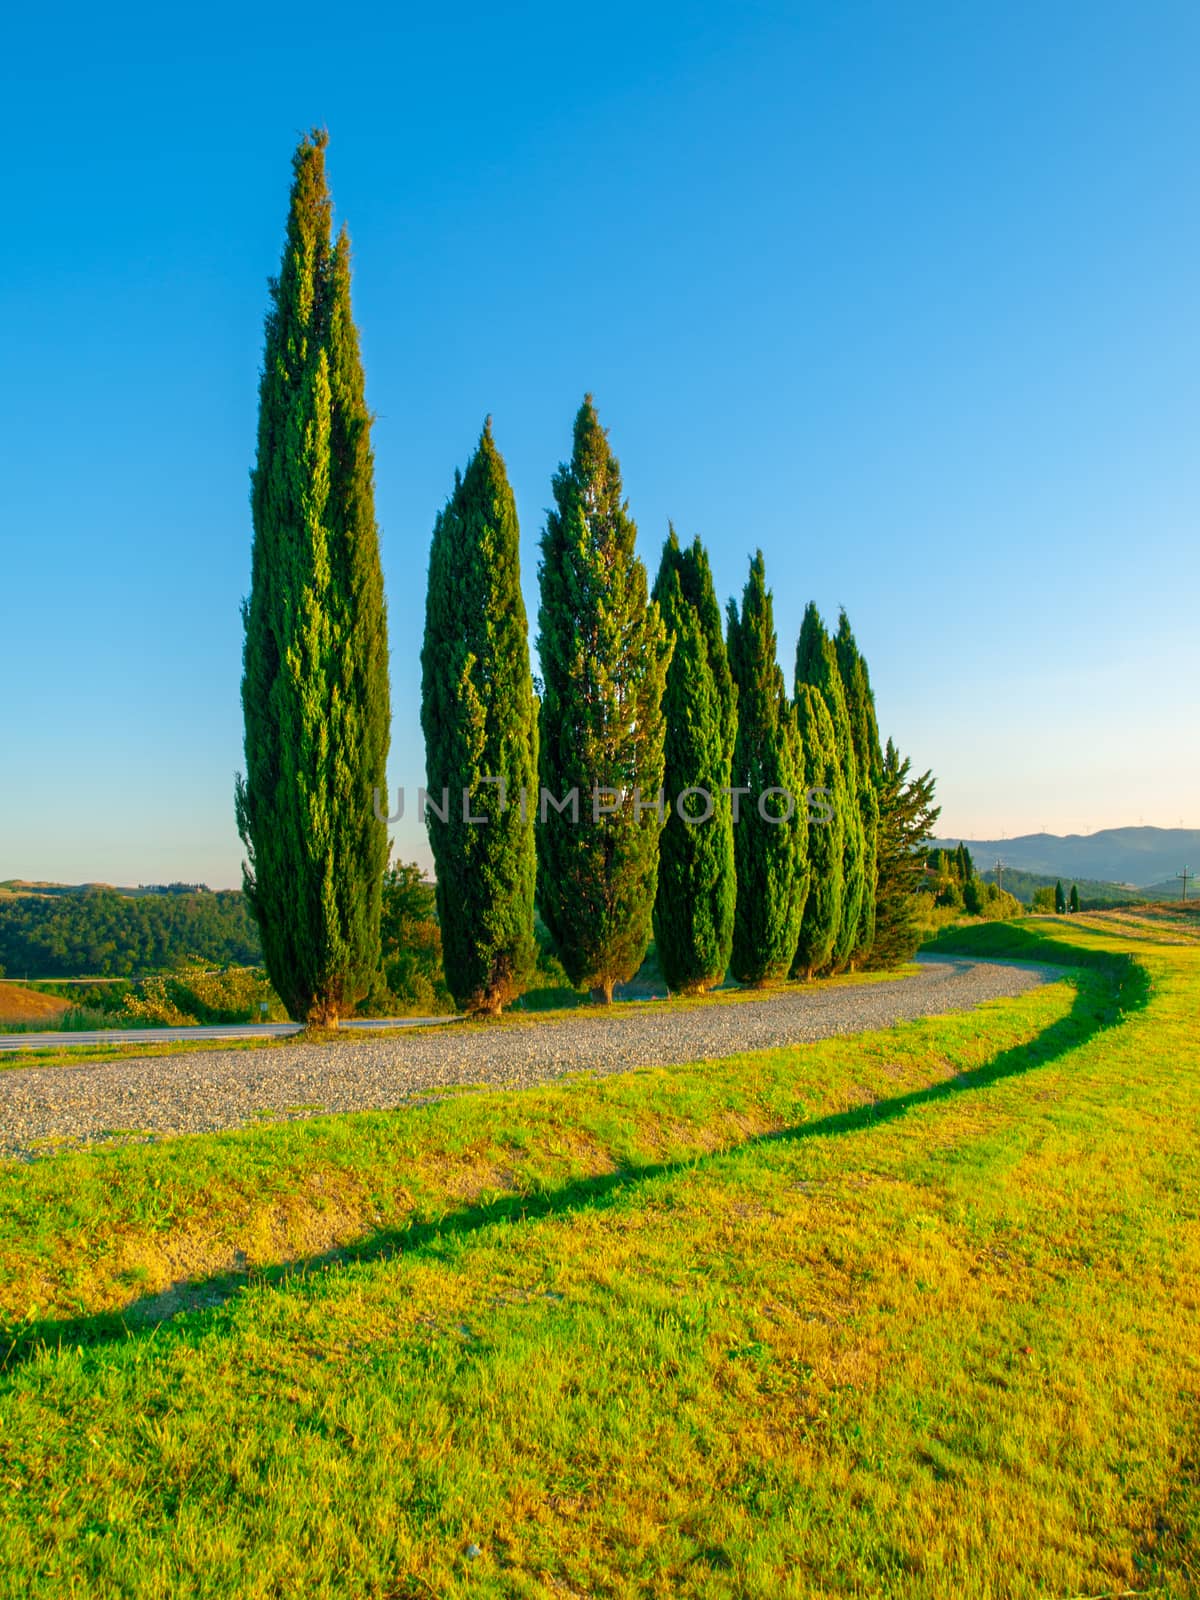 Country road with row of cypresses. Landscape of Tuscany, Italy.